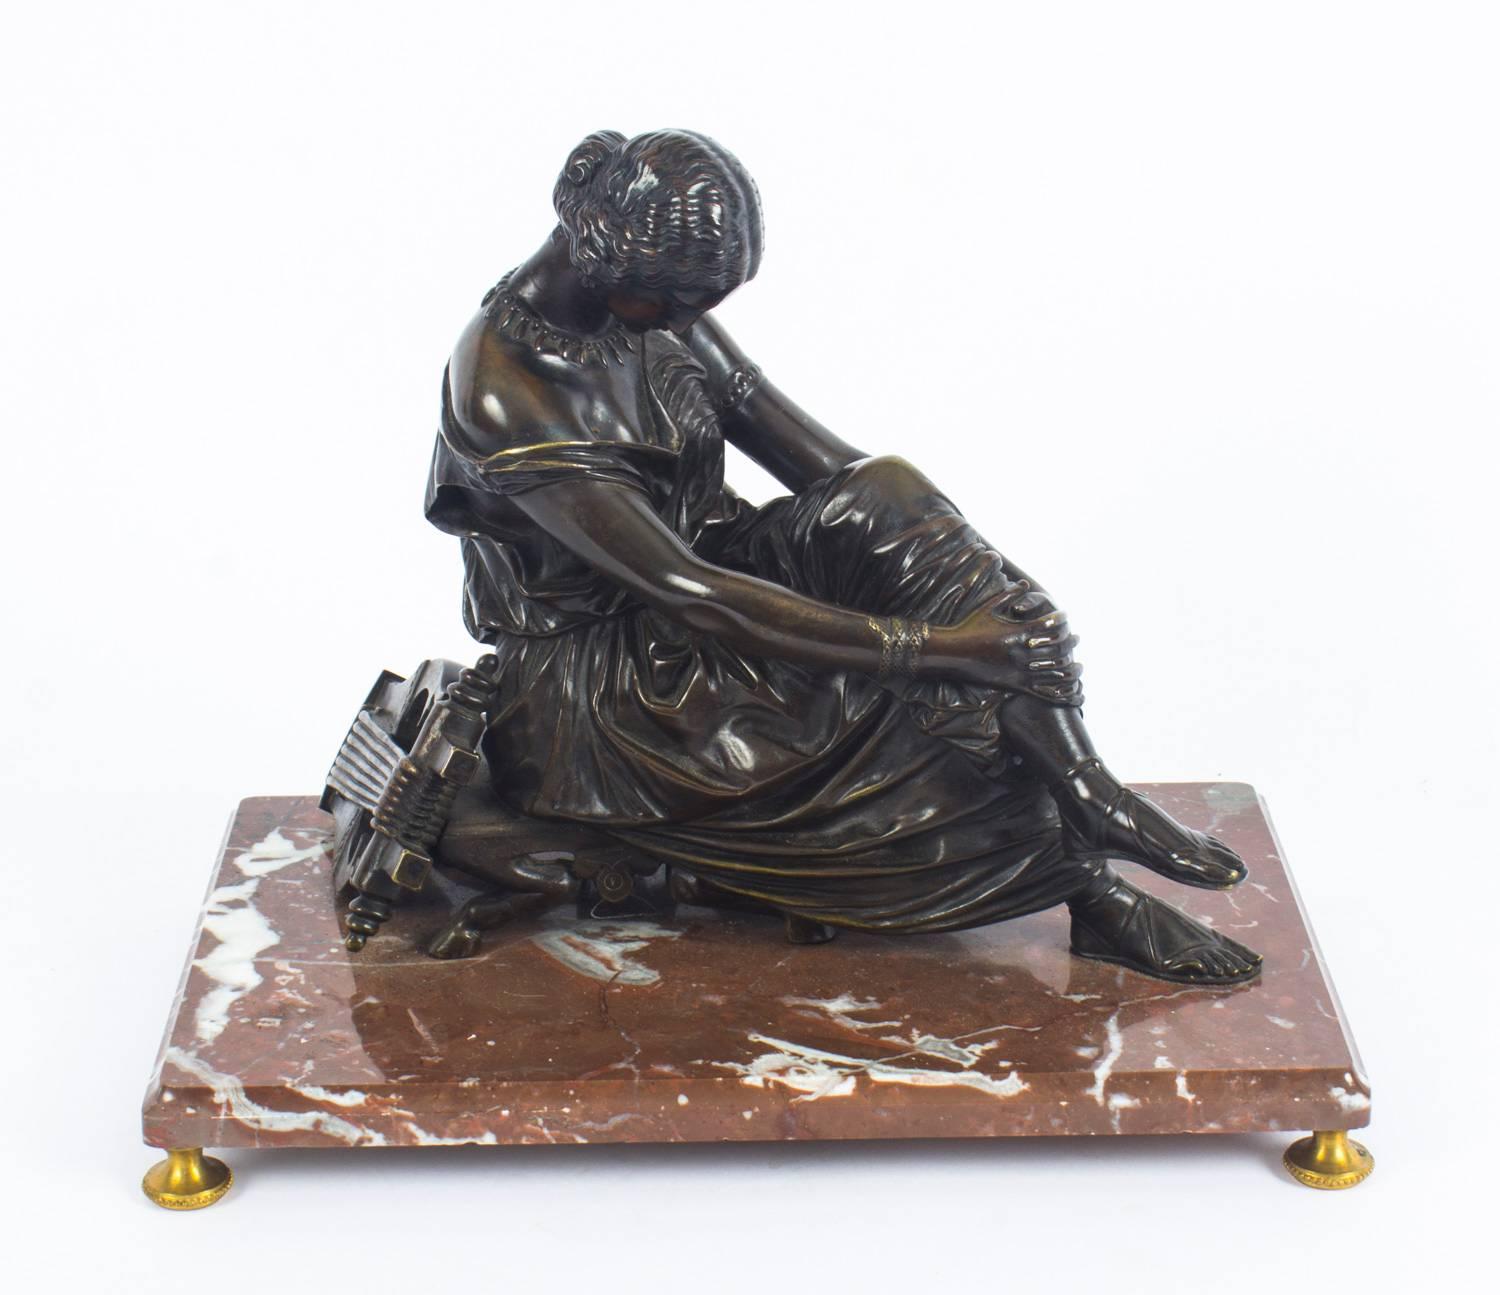 Gilt 19th Century French Bronze Sculpture of a the Seated Poet Sappho by J. Pradier